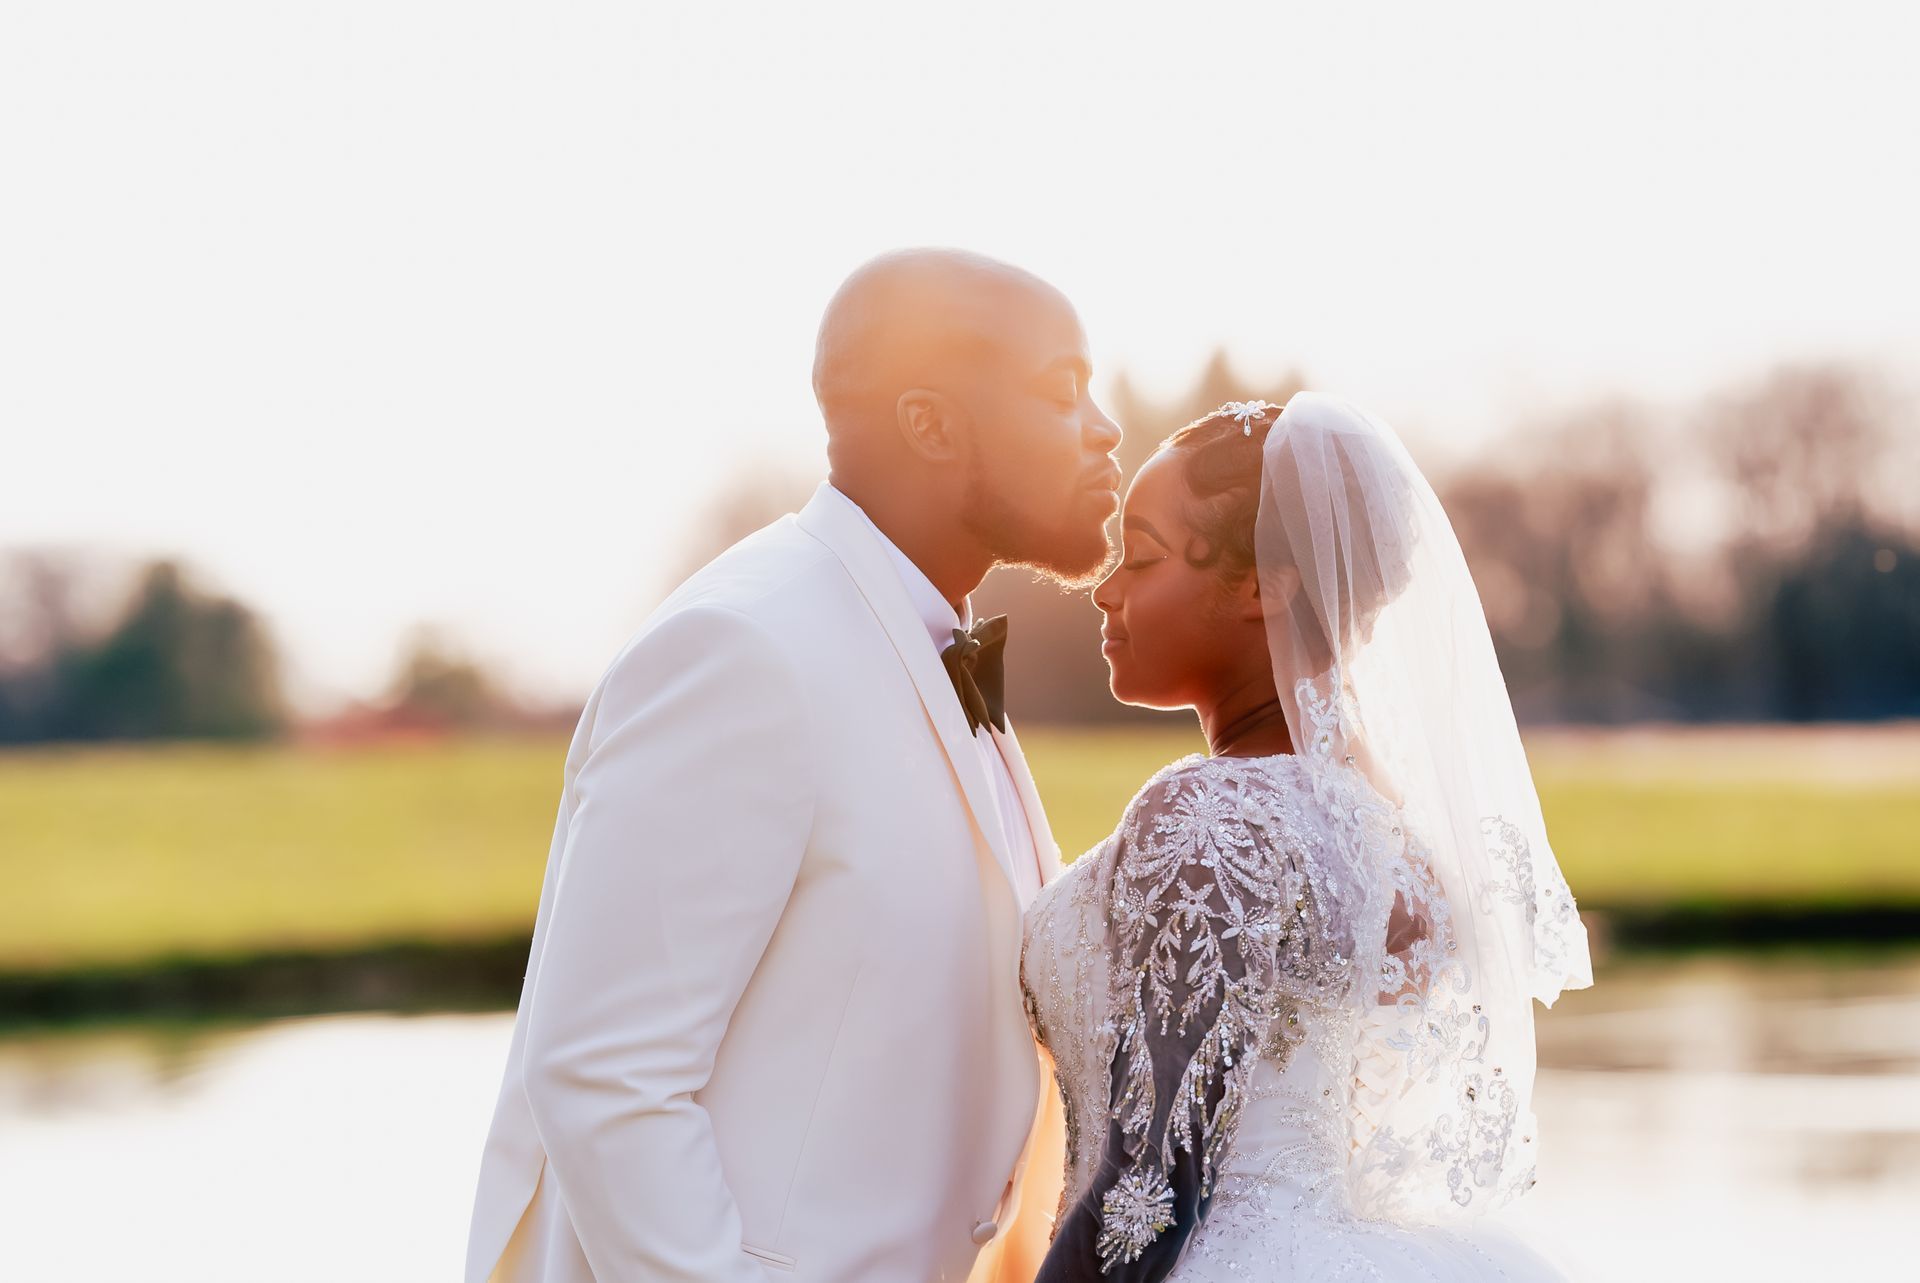 A bride and groom are kissing in front of a lake.